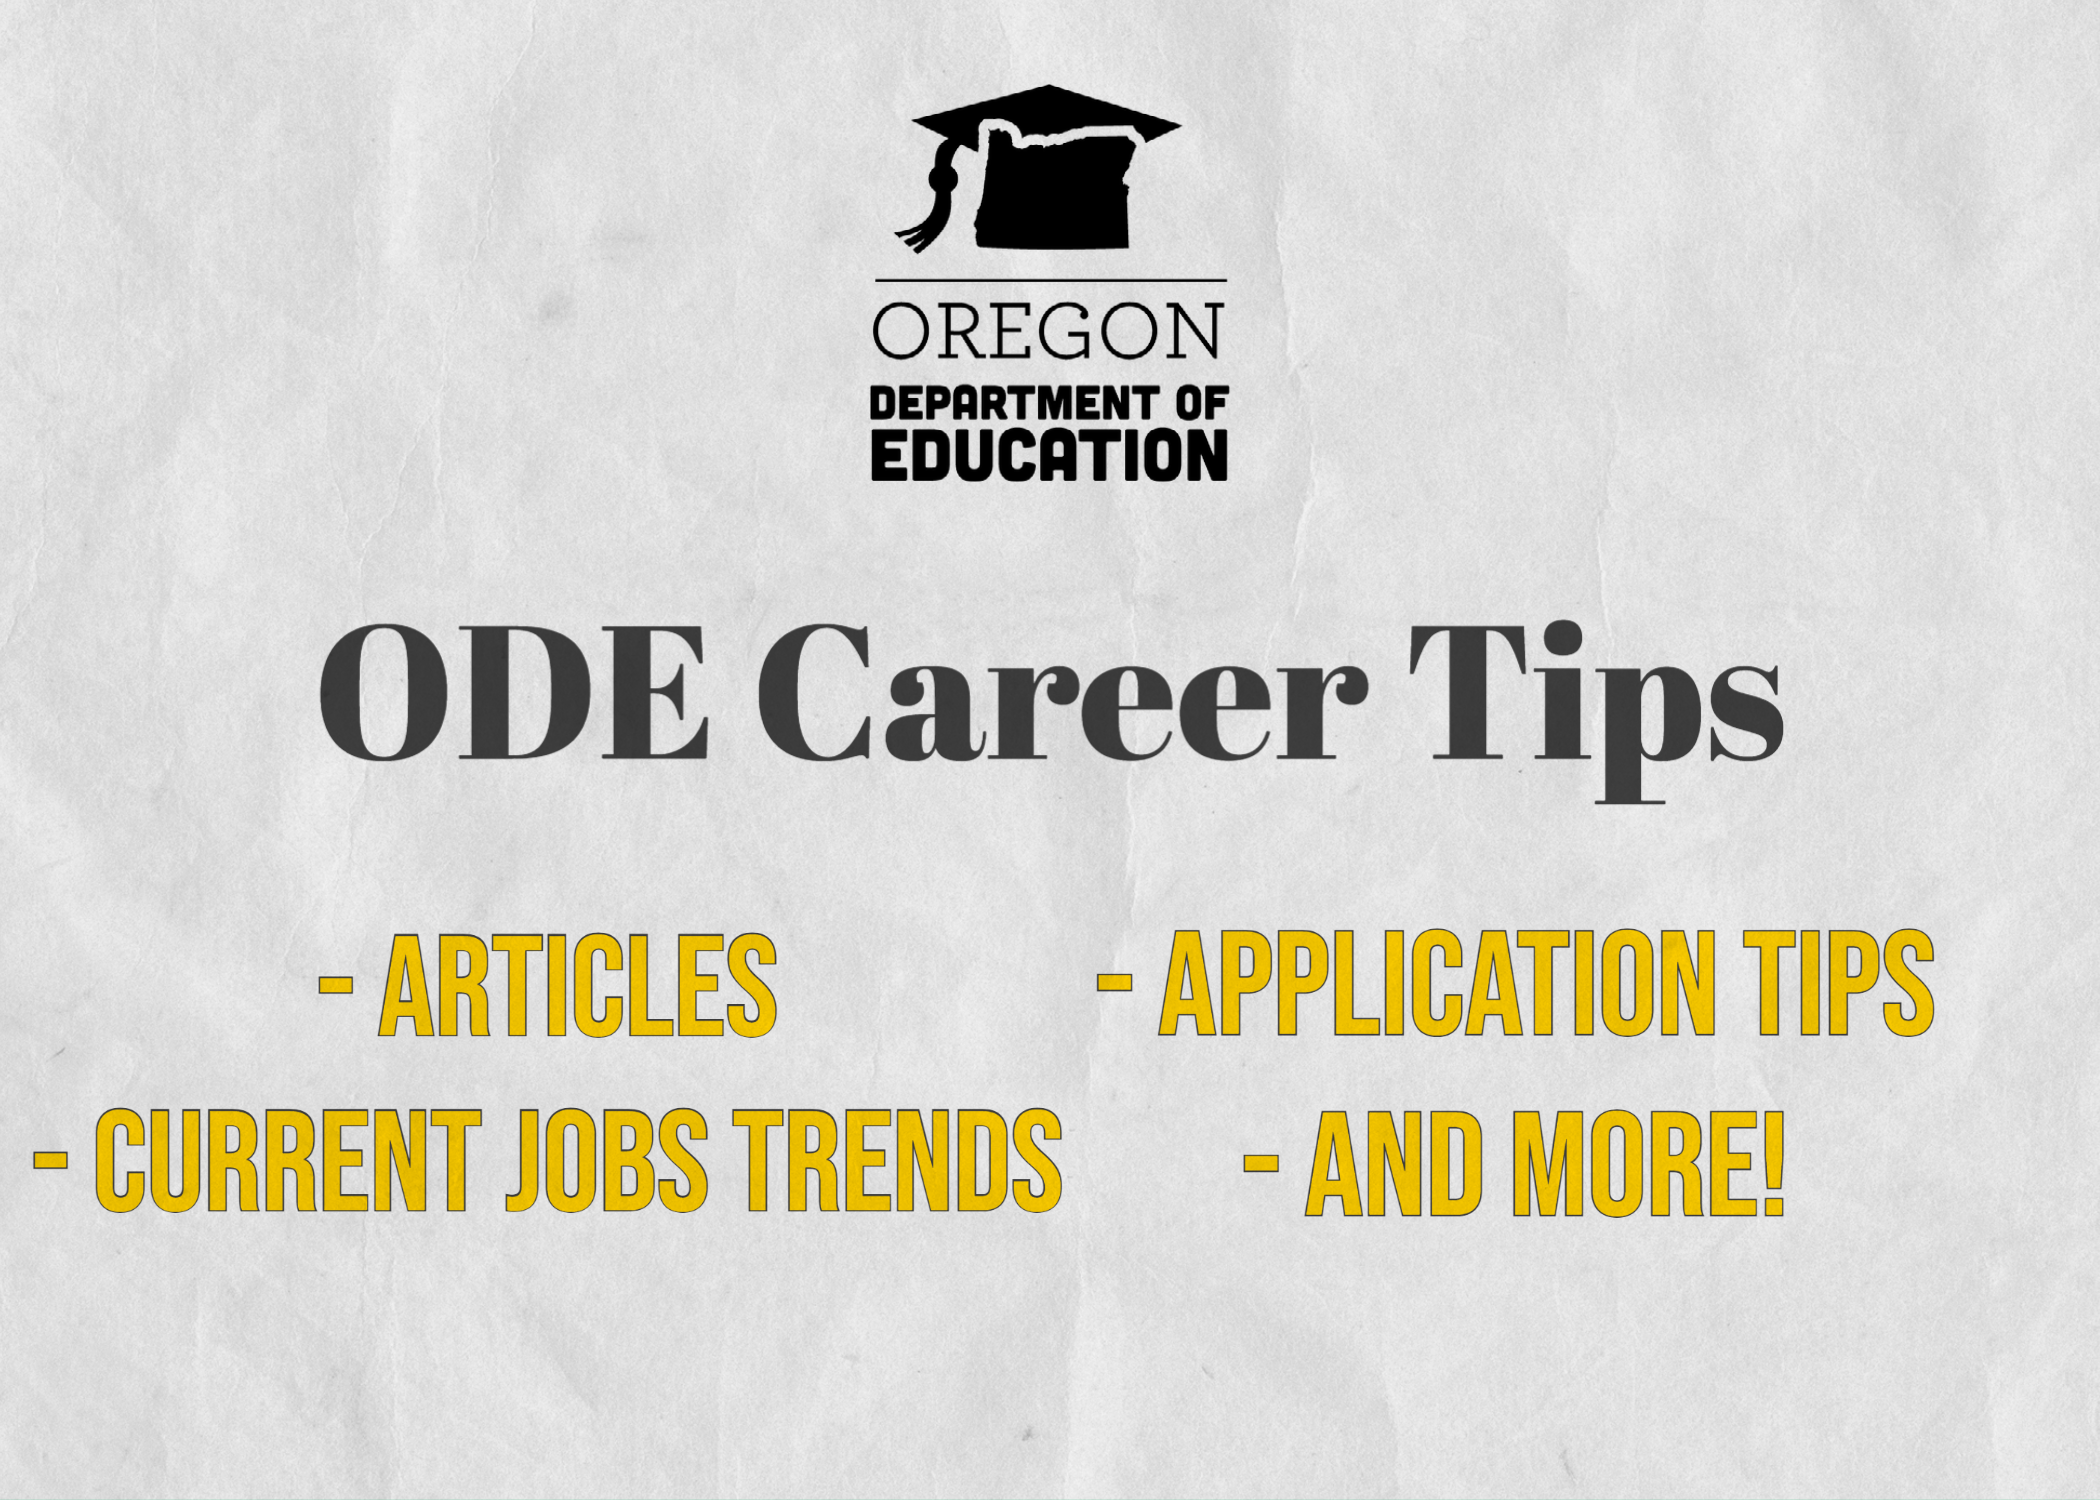 Oregon Department of Education. ODE Career Tips. Articles, Current Jobs Trends, Application Tips, and MORE!